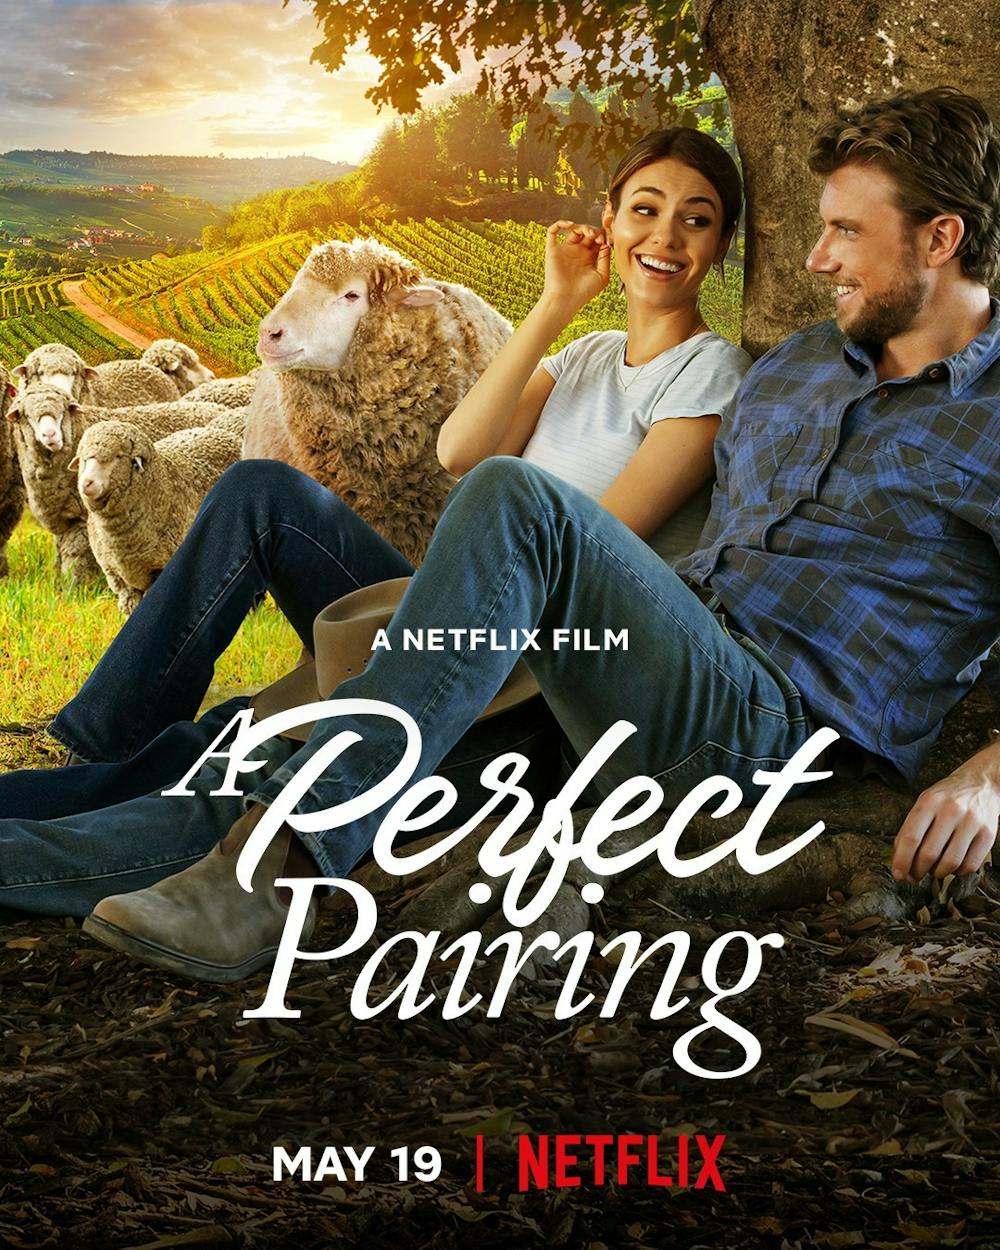 Netflix's 'A Perfect Pairing' is the perfect Valentine's Day movie